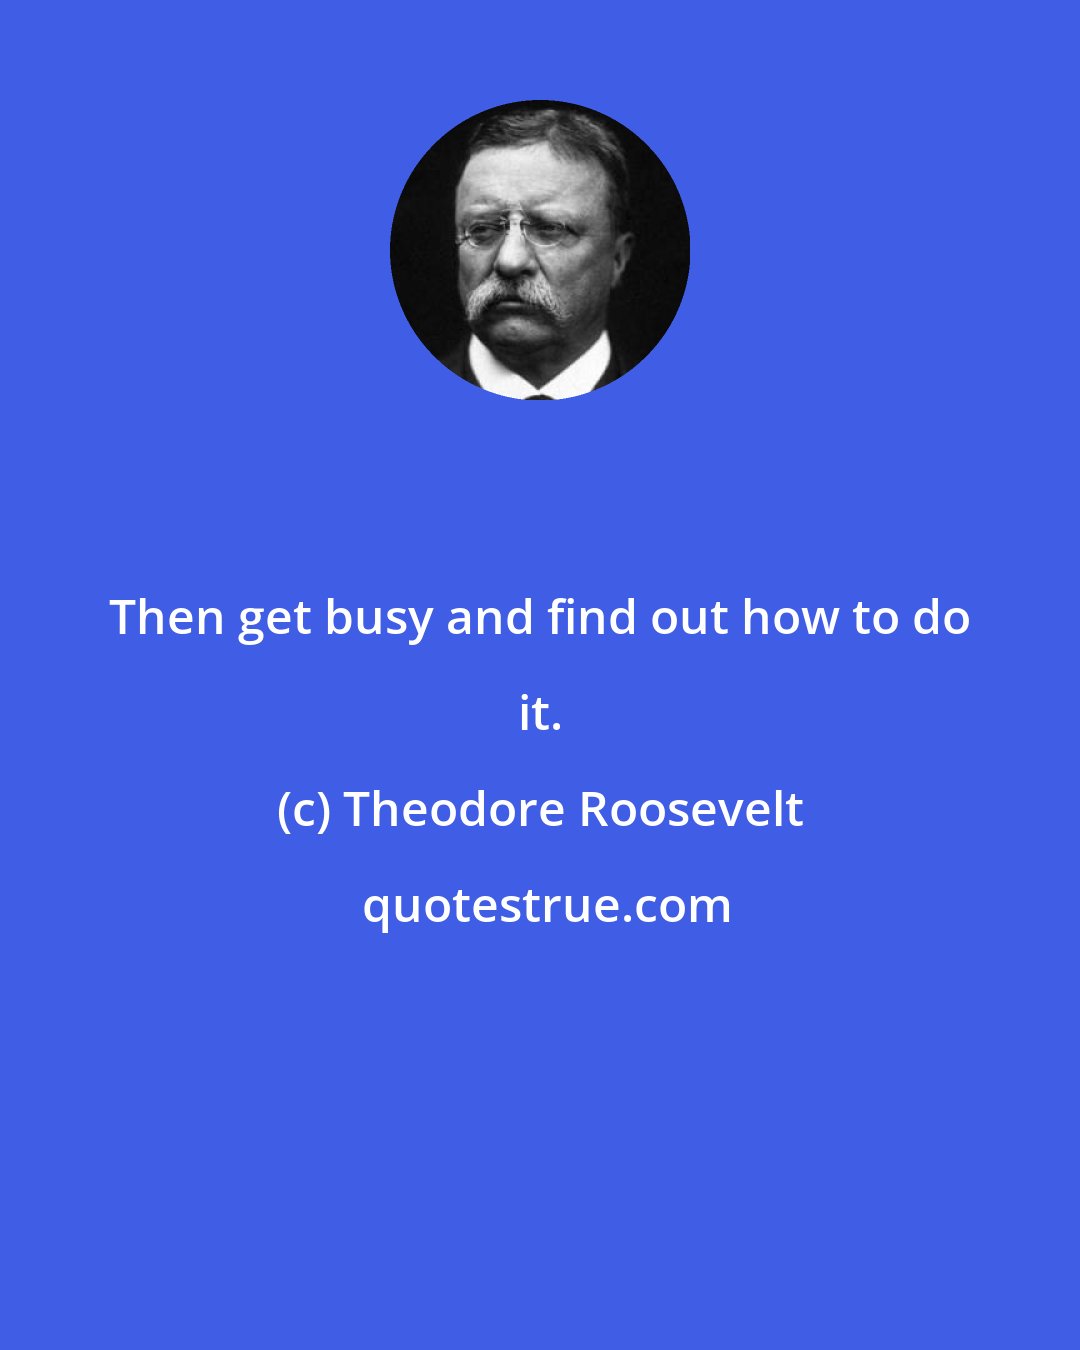 Theodore Roosevelt: Then get busy and find out how to do it.